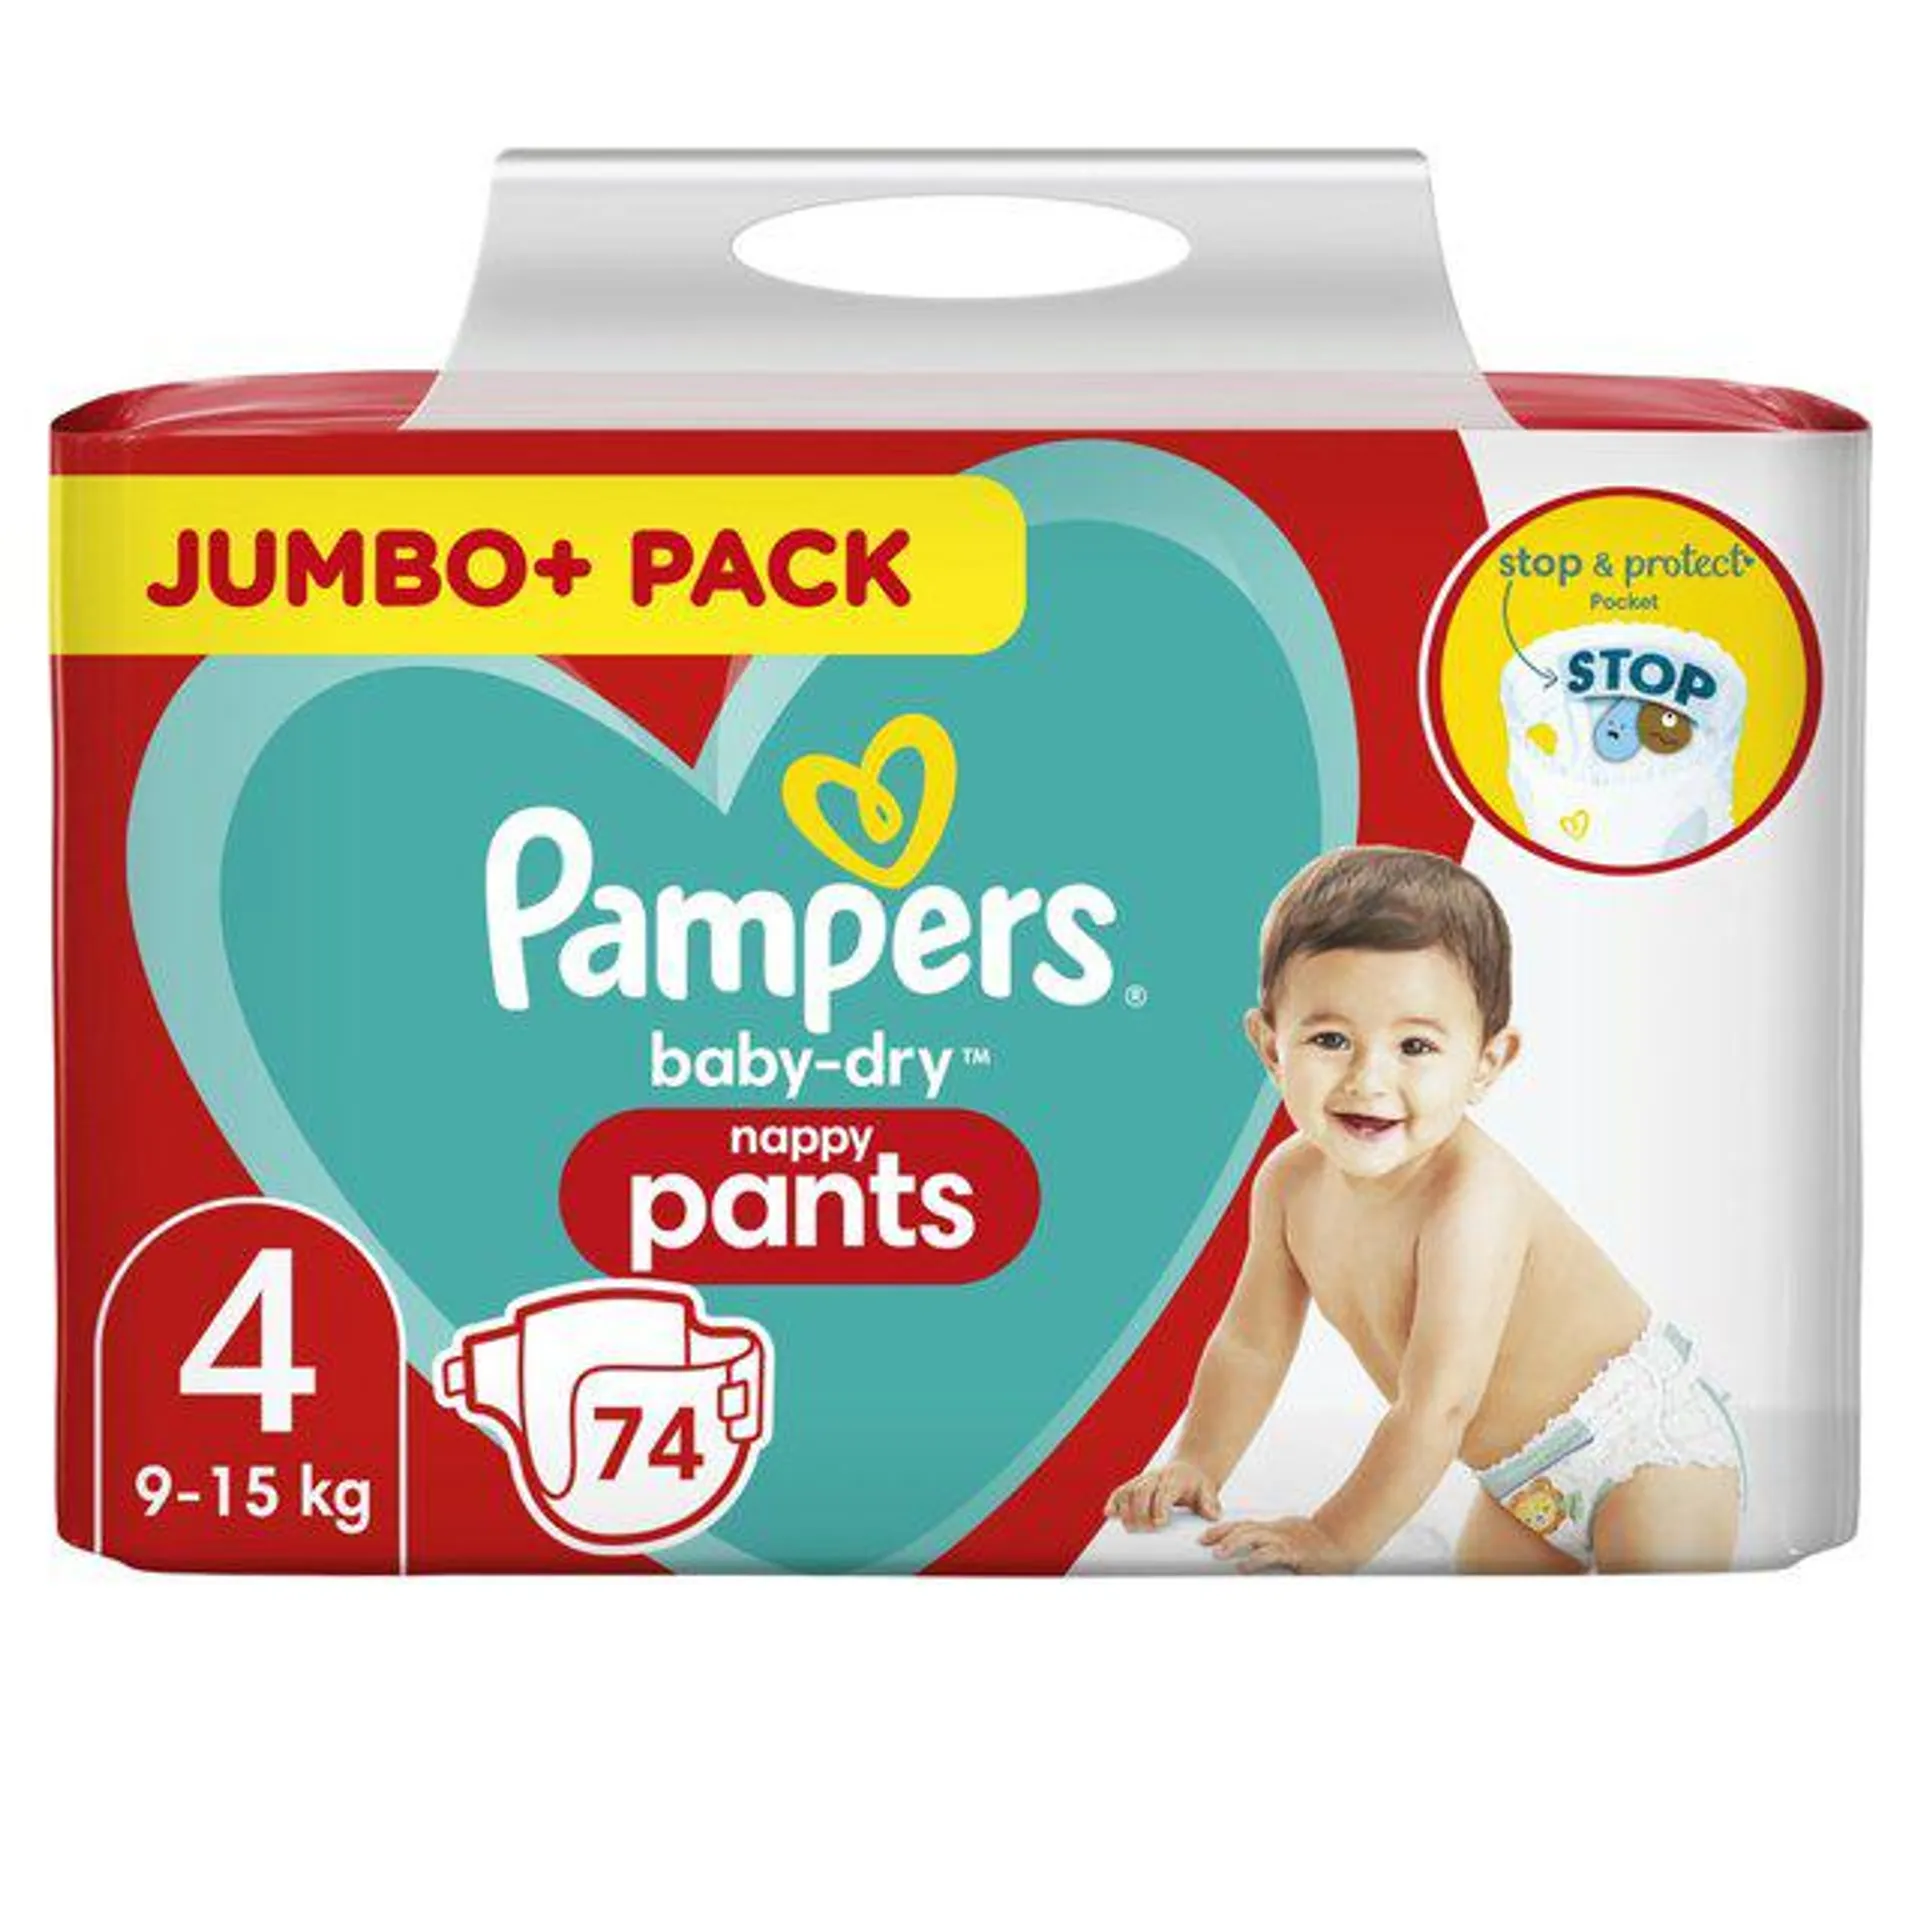 Pampers Baby-Dry Nappy Pants Size 4 Pants Jumbo + Pack 74 per pack